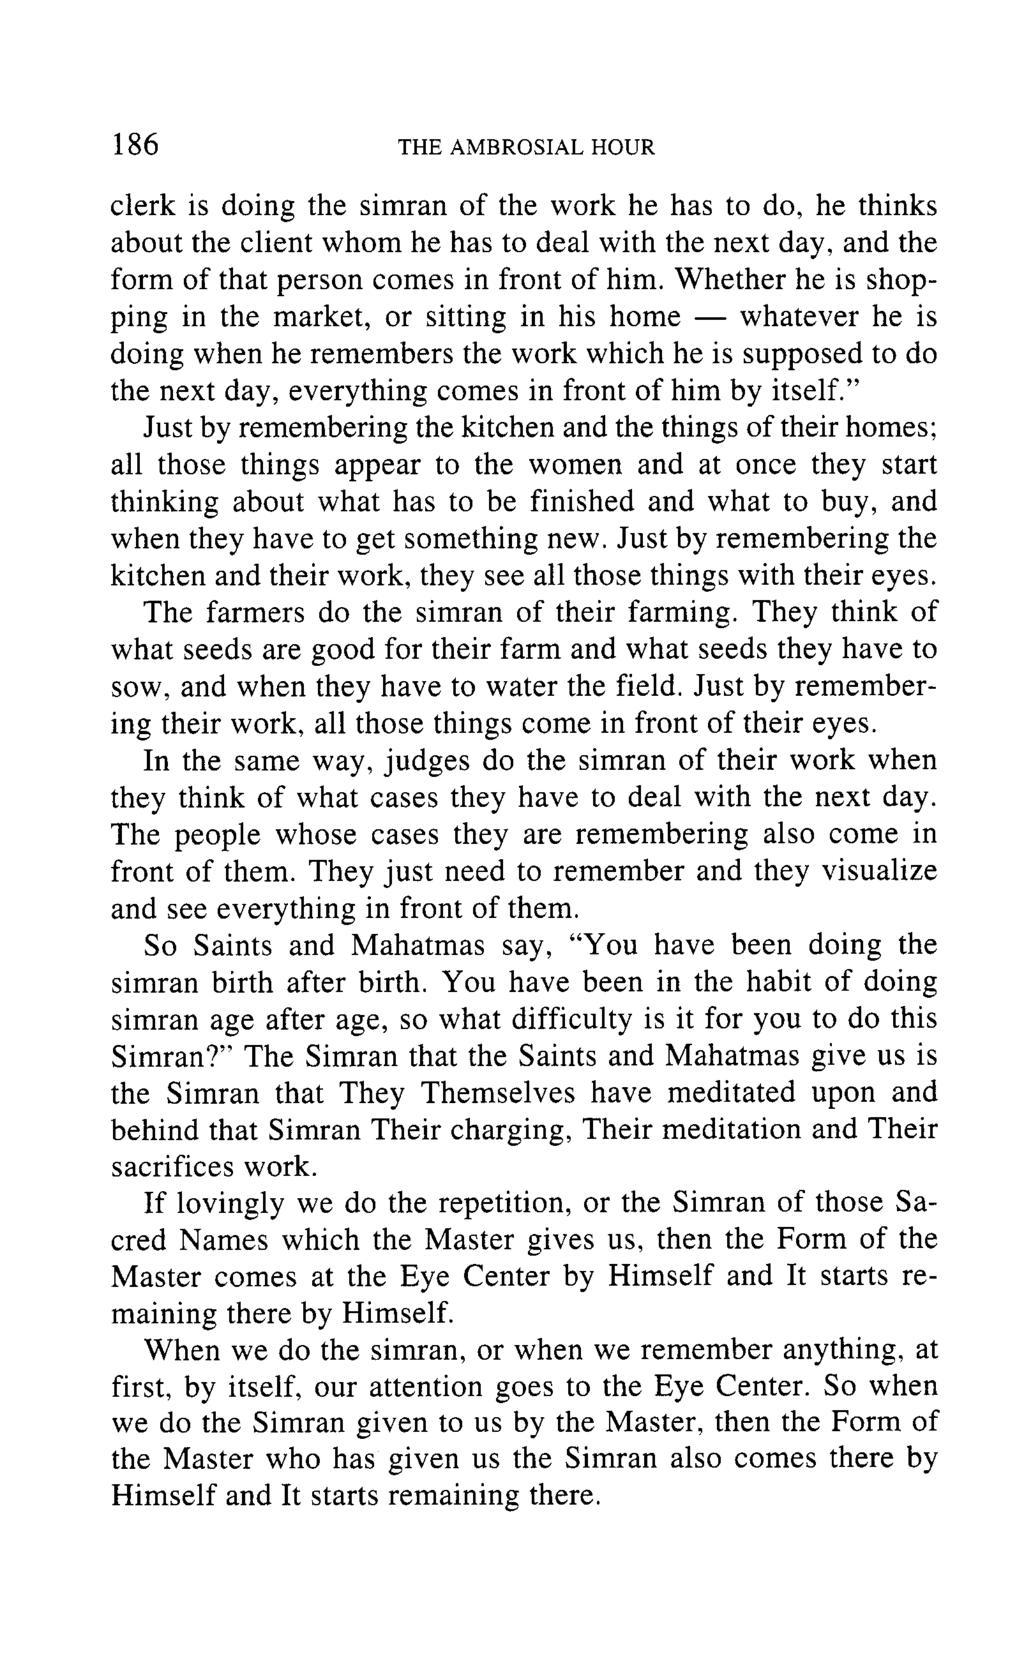 186 THE AMBROSIAL HOUR clerk is doing the simran of the work he has to do, he thinks about the client whom he has to deal with the next day, and the form of that person comes in front of him.